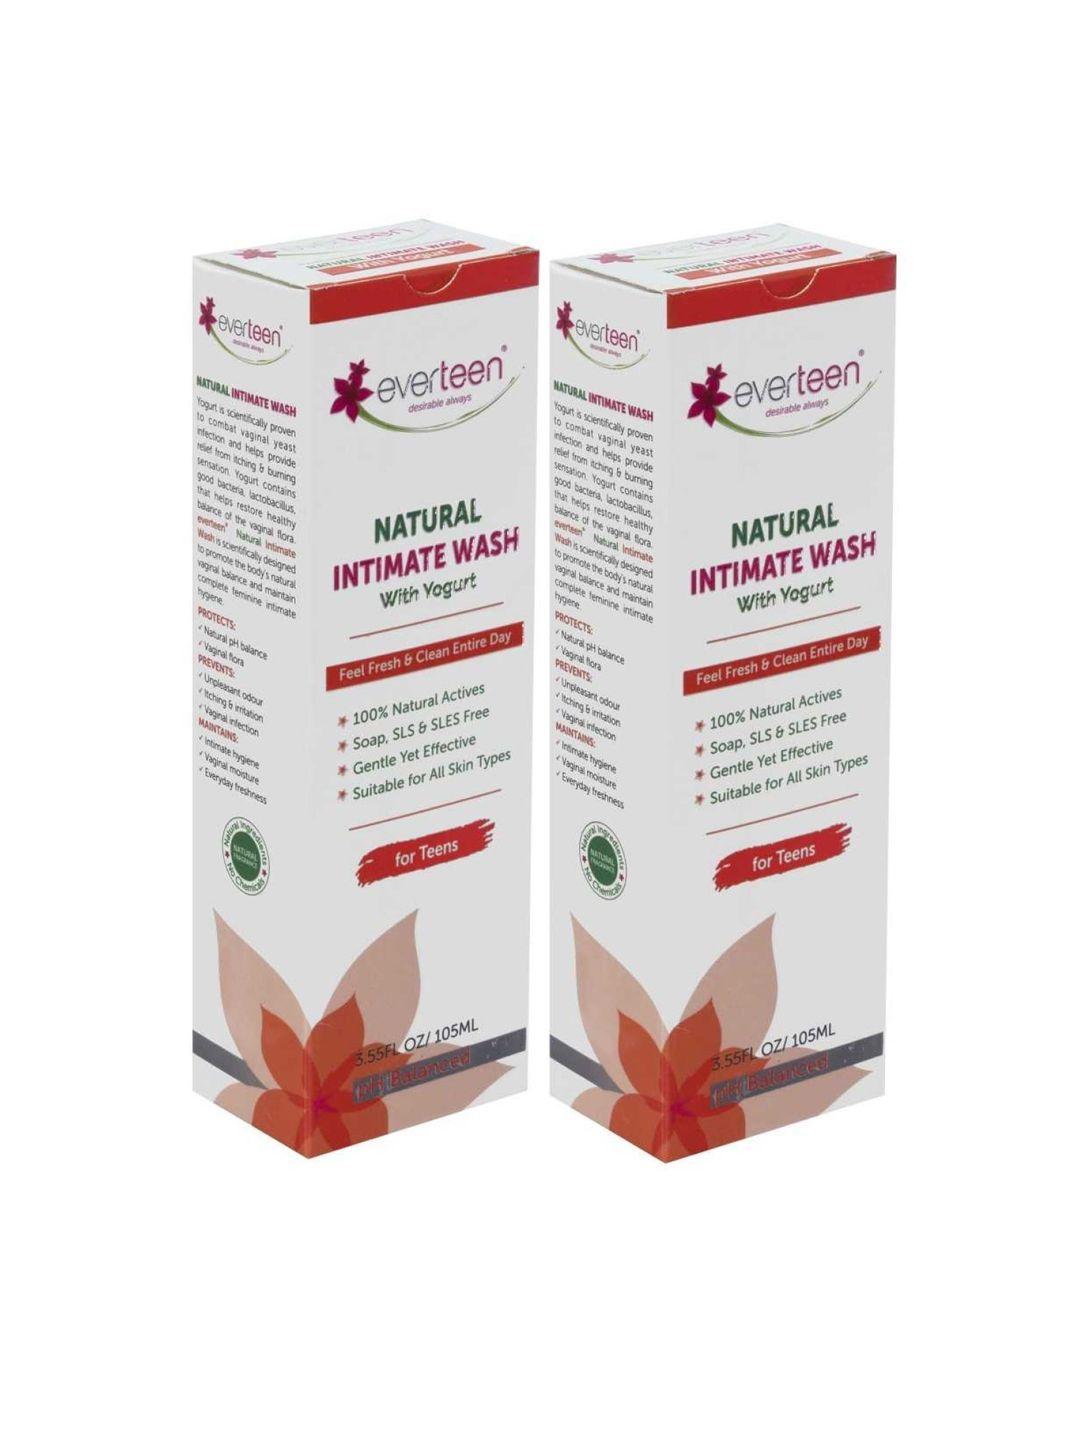 everteen-woman-pack-of-2-natural-intimate-wash-with-yogurt-105ml-each